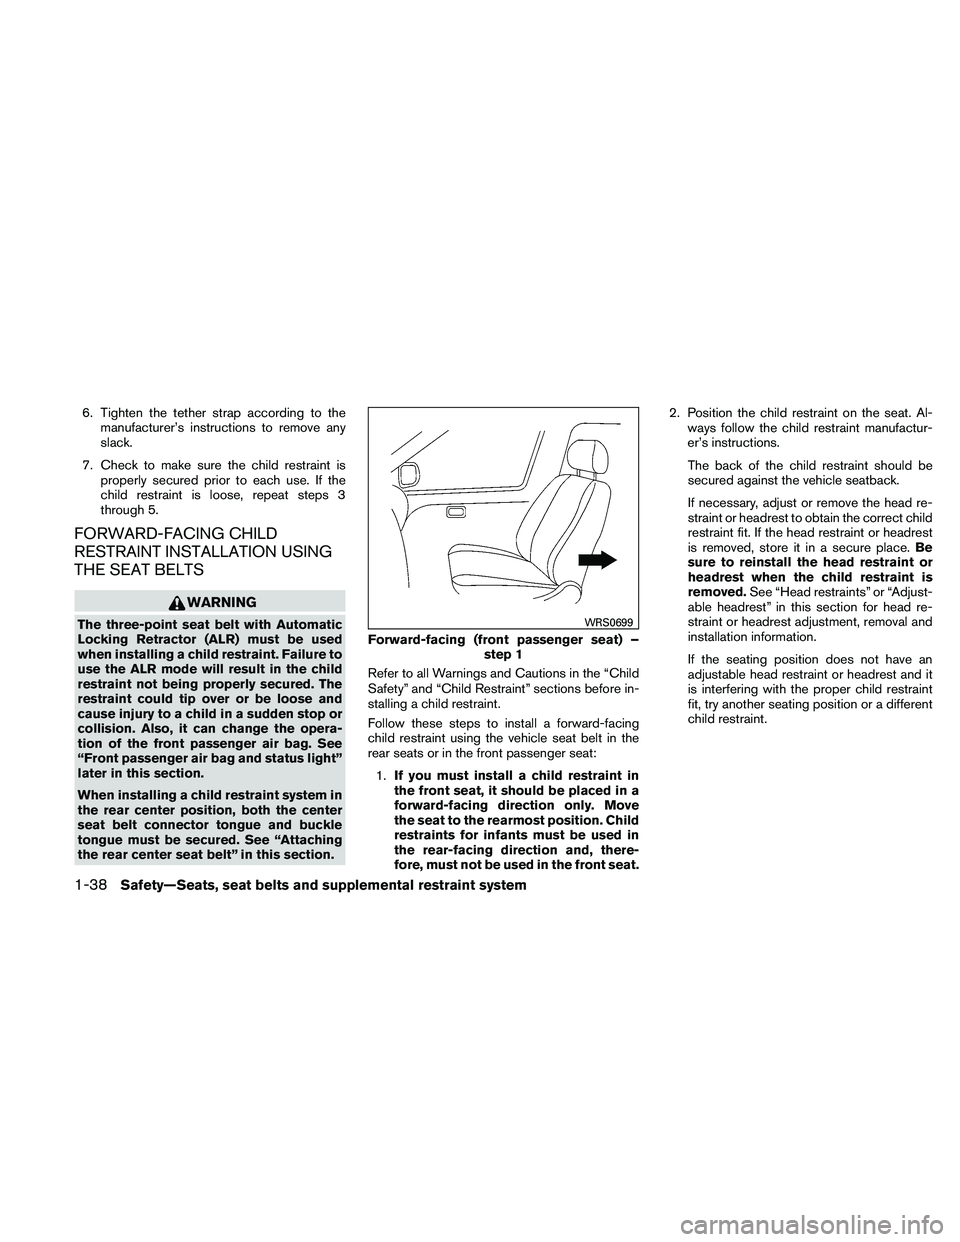 NISSAN XTERRA 2010  Owner´s Manual 6. Tighten the tether strap according to themanufacturer’s instructions to remove any
slack.
7. Check to make sure the child restraint is properly secured prior to each use. If the
child restraint i